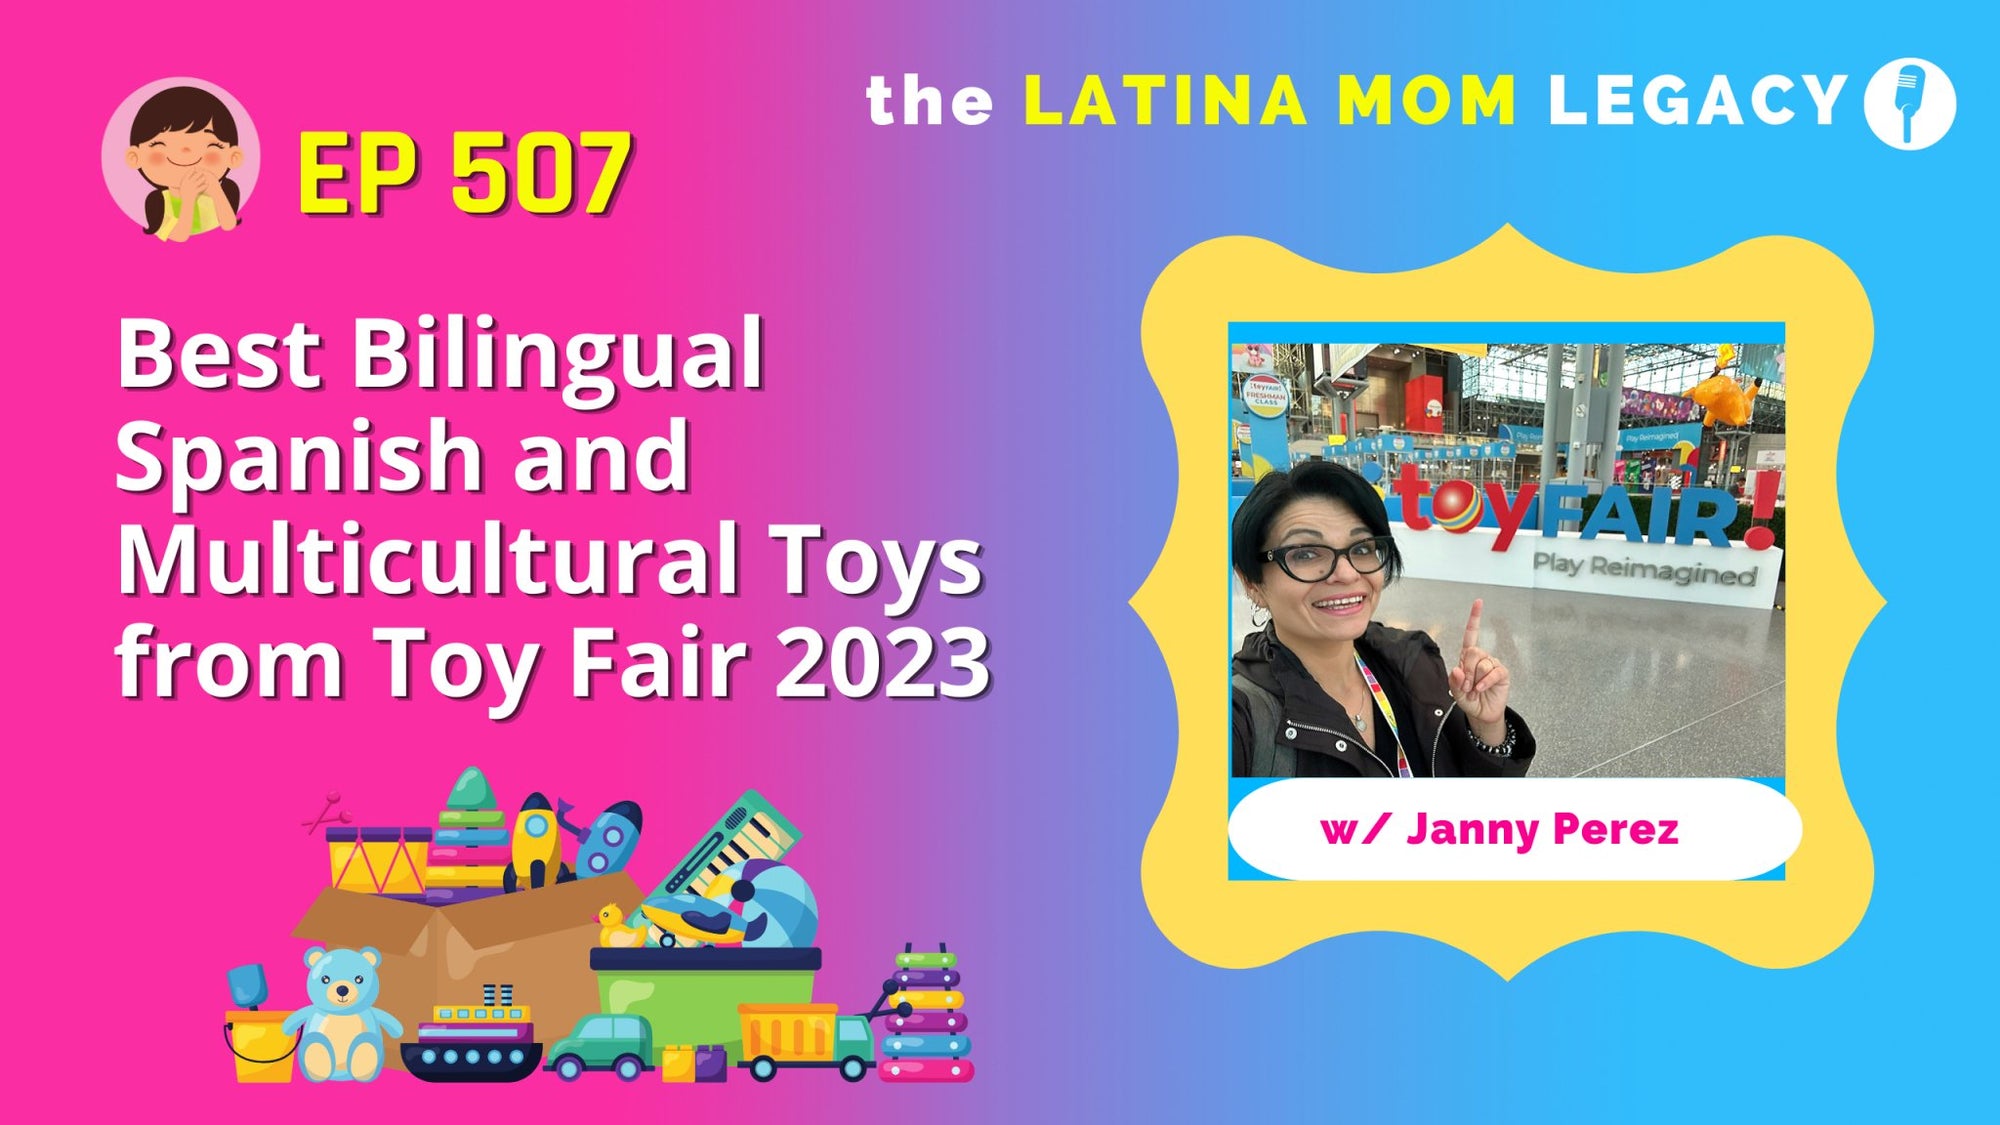 507-Best Bilingual Spanish and Multicultural Toys From Toy Fair 2023 - Mi LegaSi